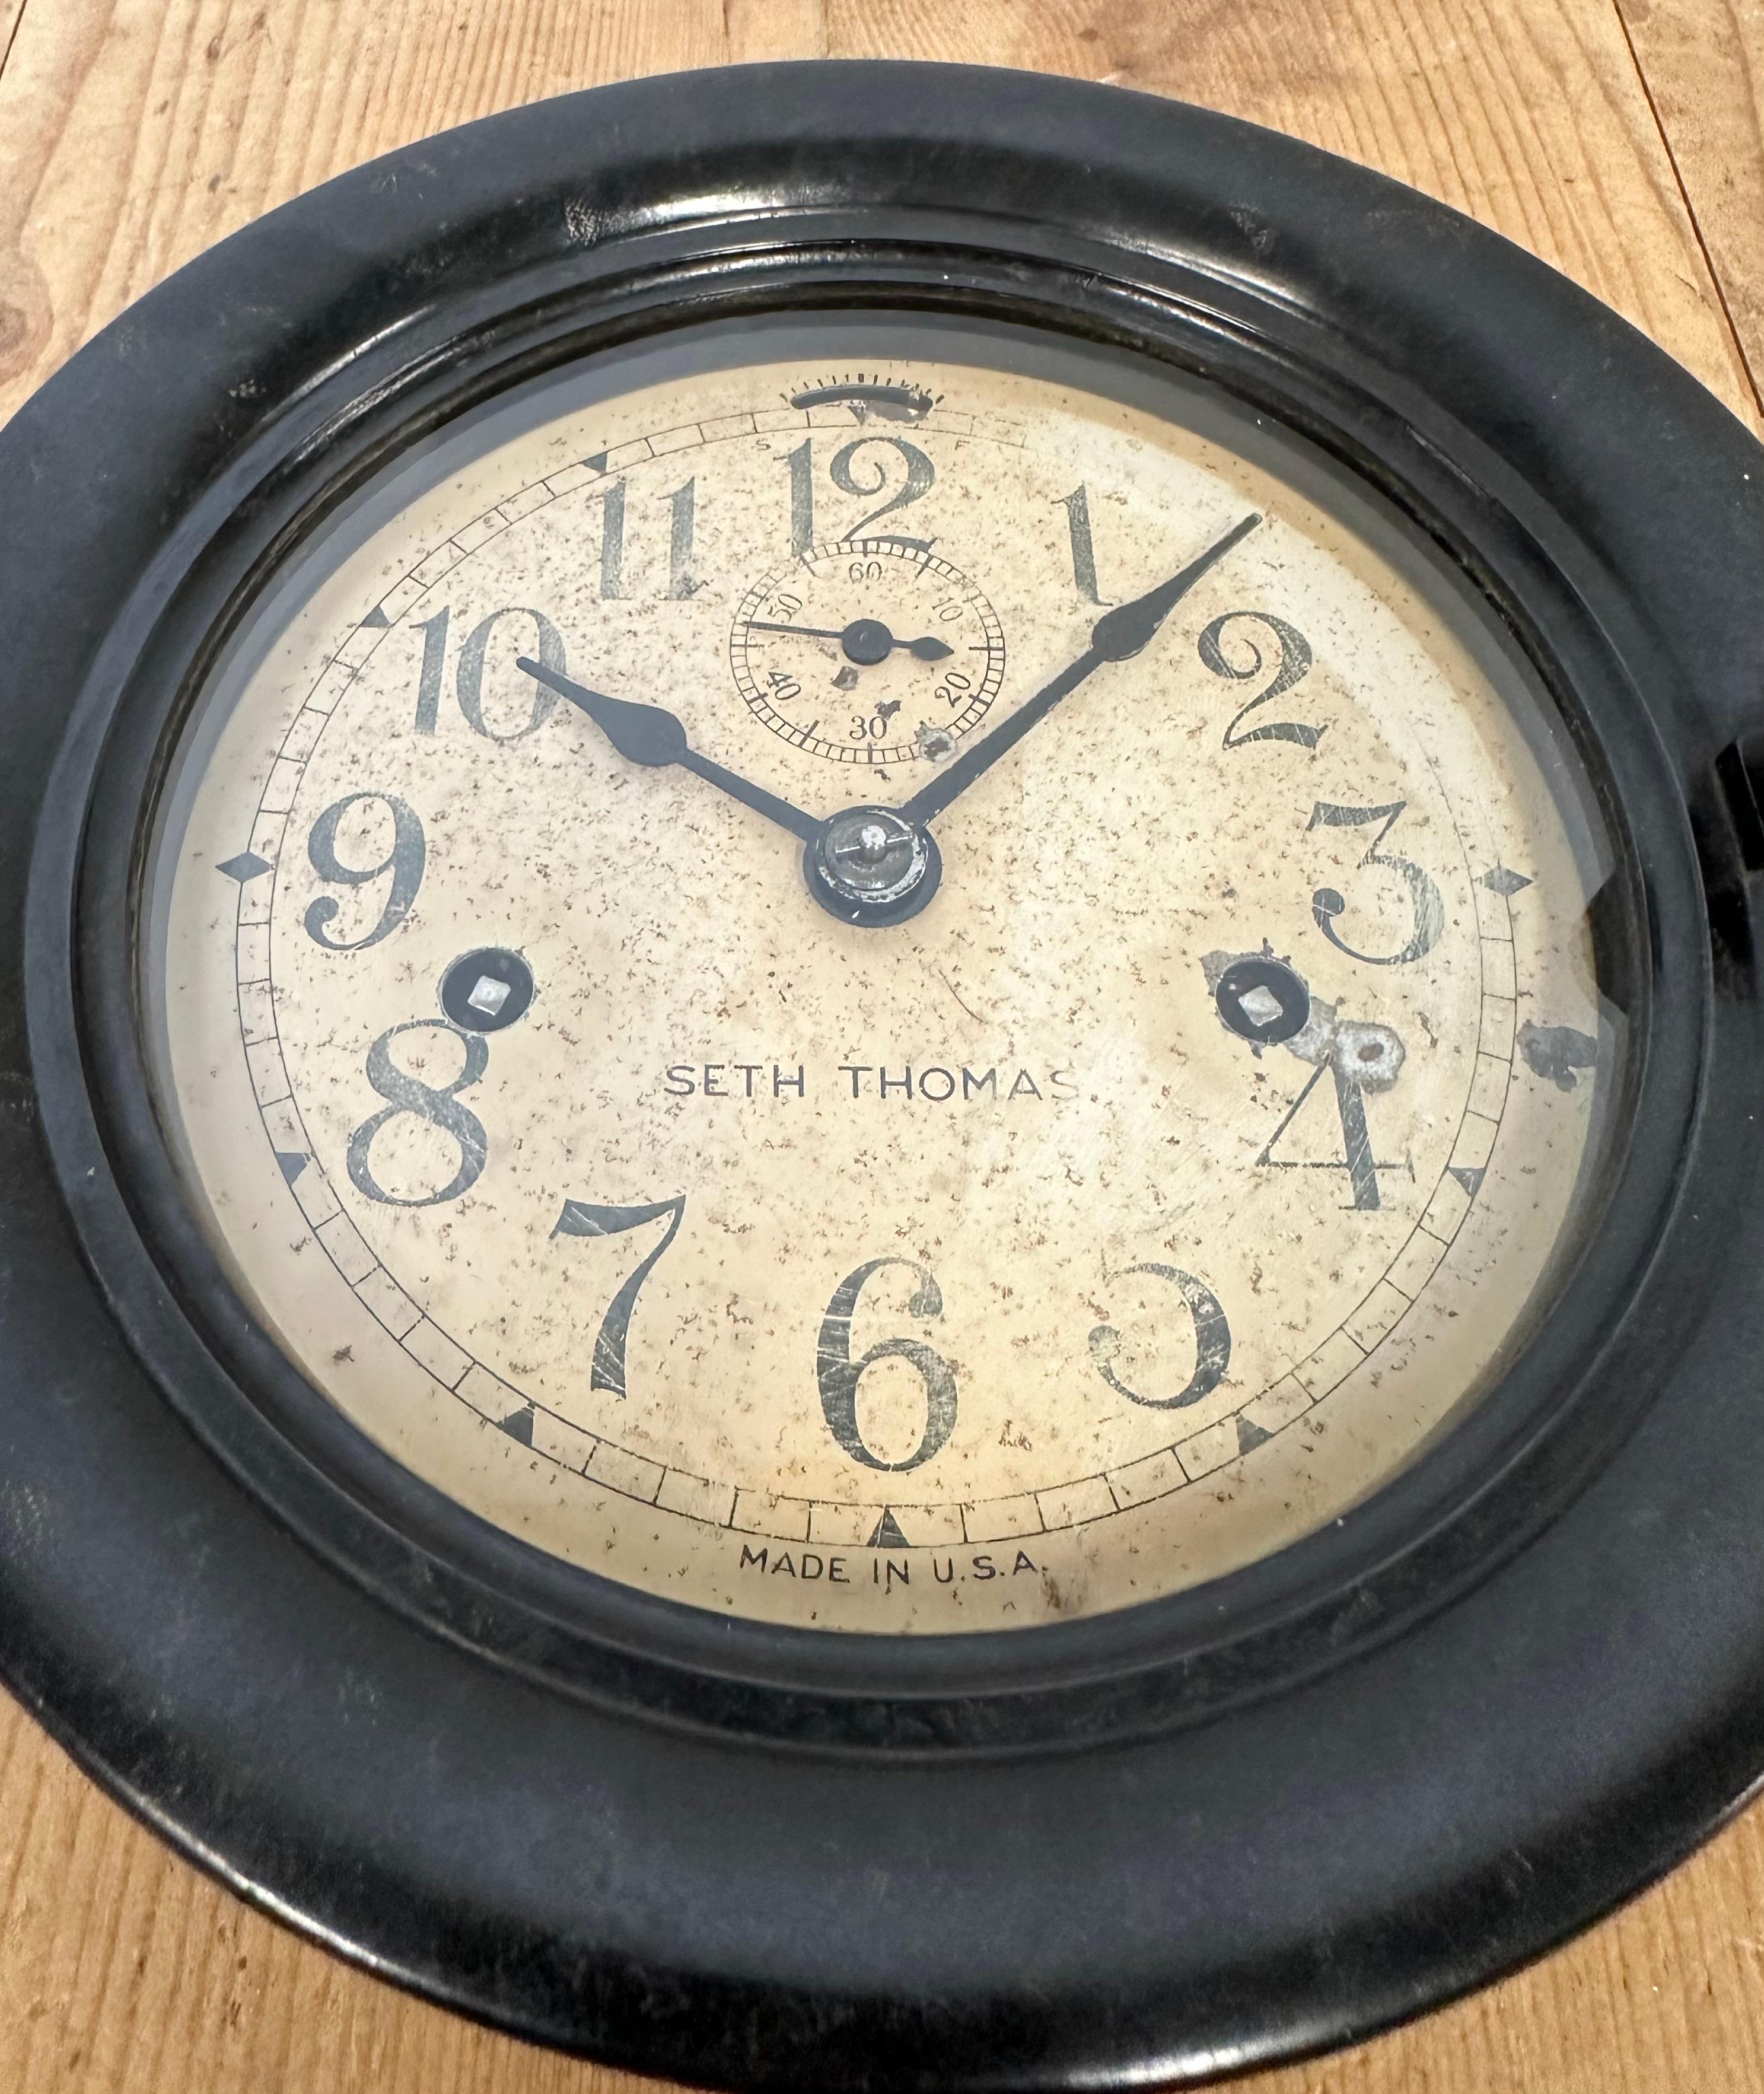  Vintage Mechanical Bakelite Maritime Wall Clock from Seth Thomas, 1950s For Sale 2